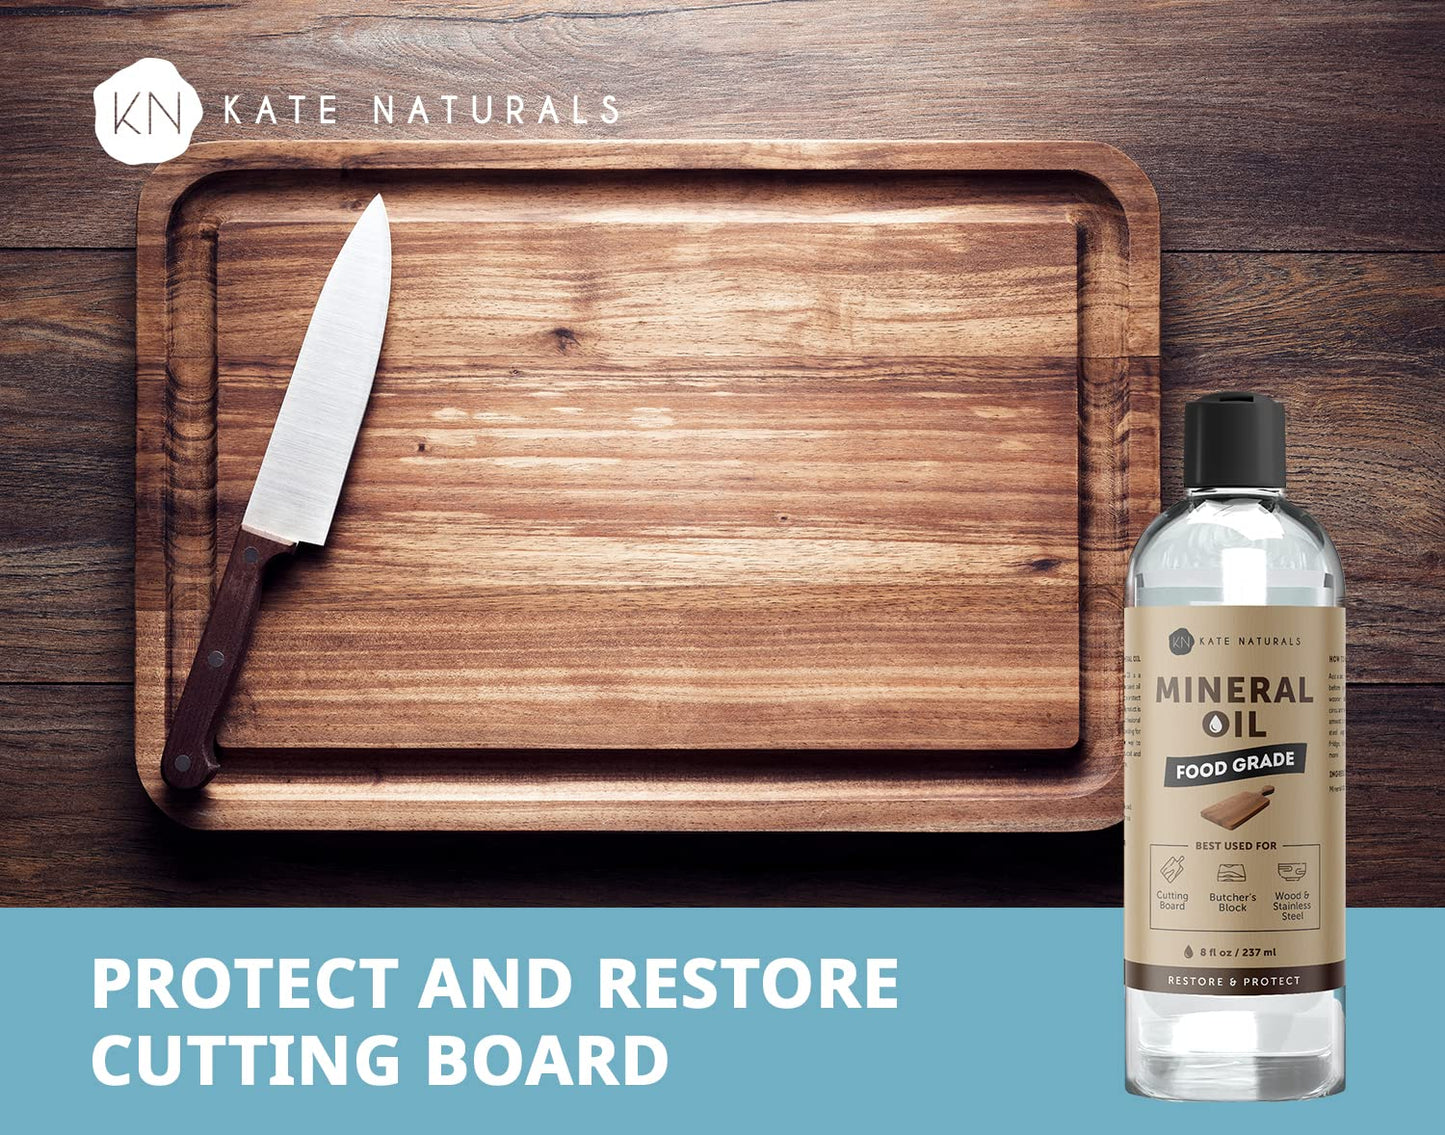 Mineral Oil for Cutting Board 8oz - Kate Naturals. Food-Grade & Food Safe Mineral Oil to Protect Wood on Cutting Boards & Butcher Blocks